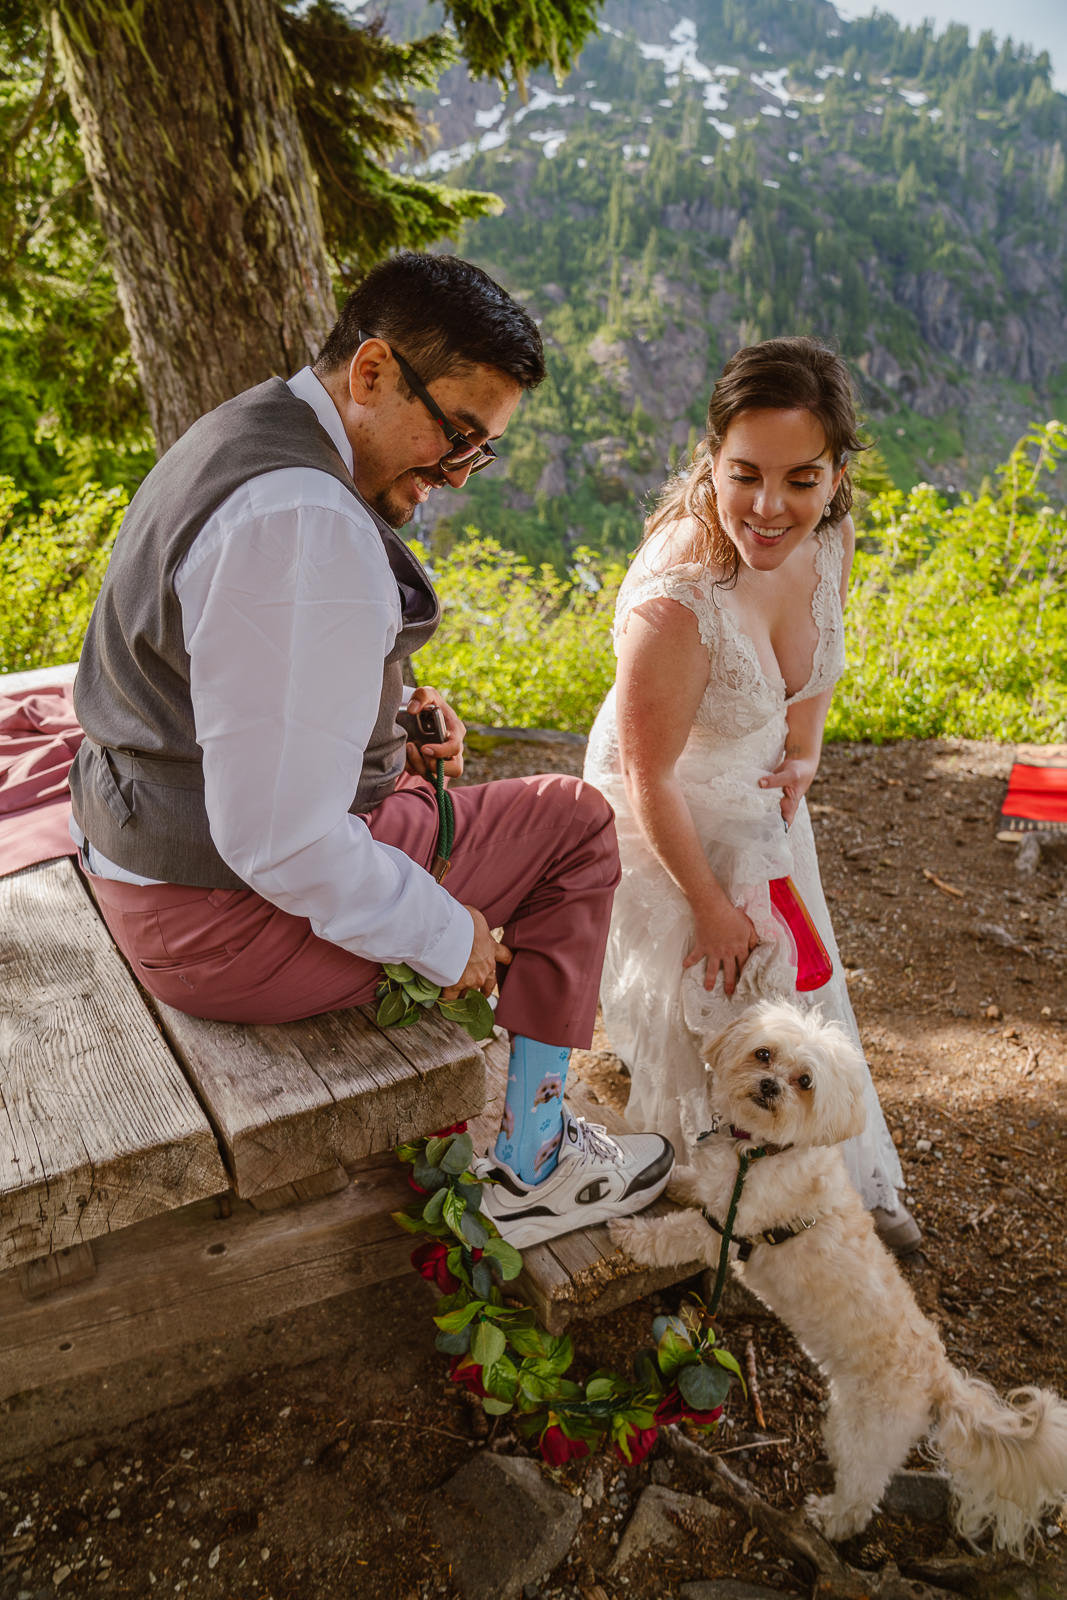 Groom wears socks with picture of dog